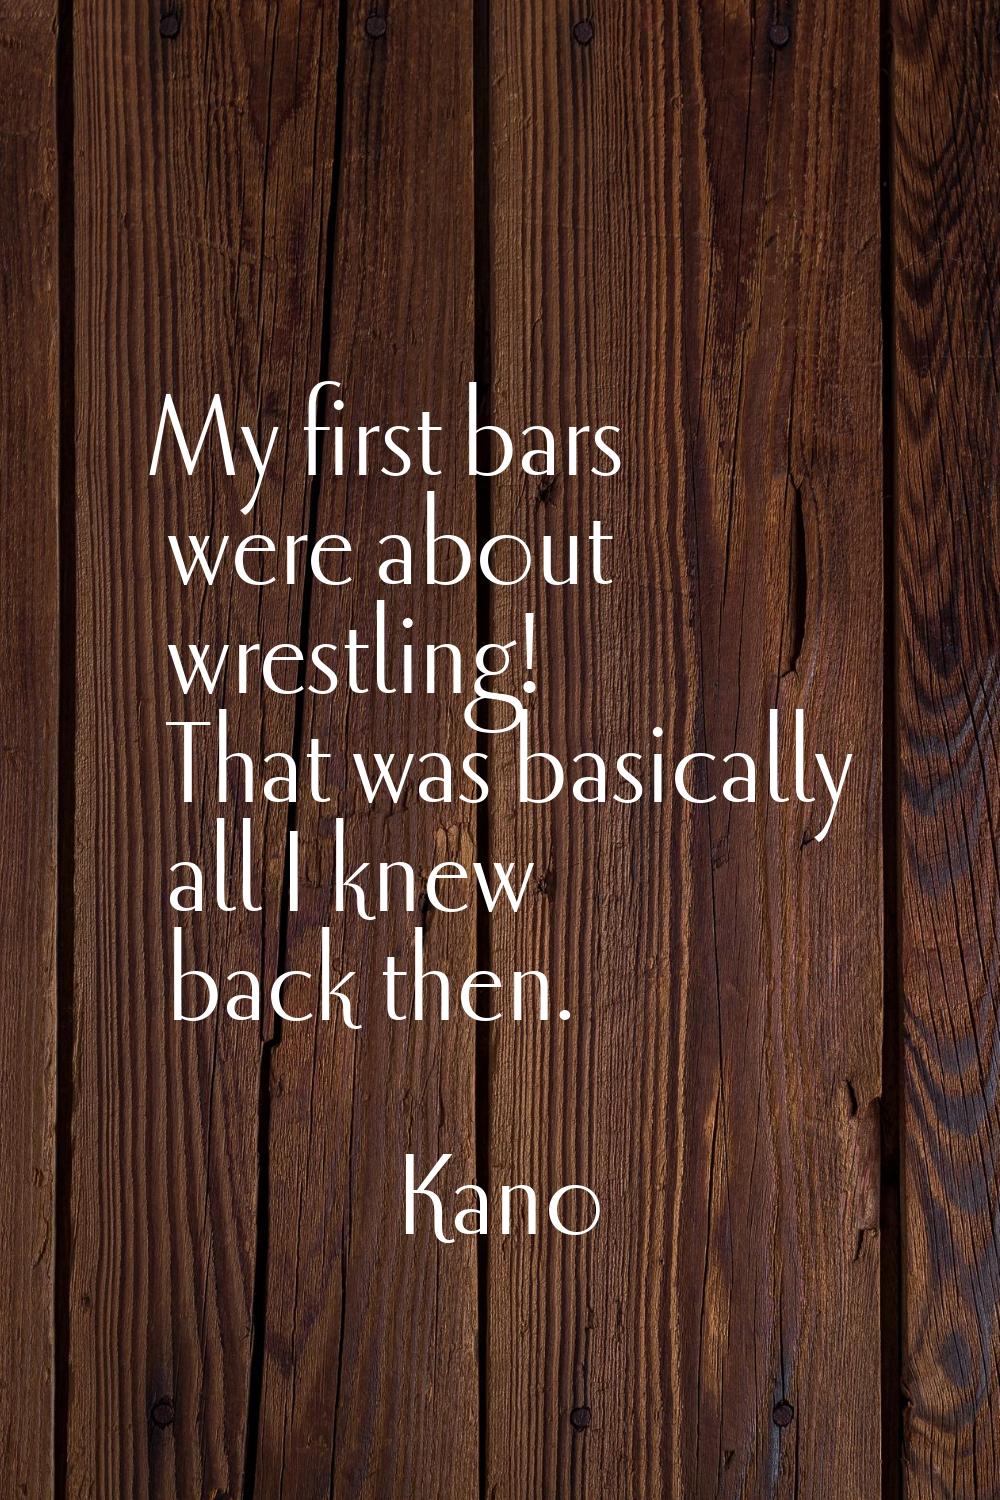 My first bars were about wrestling! That was basically all I knew back then.